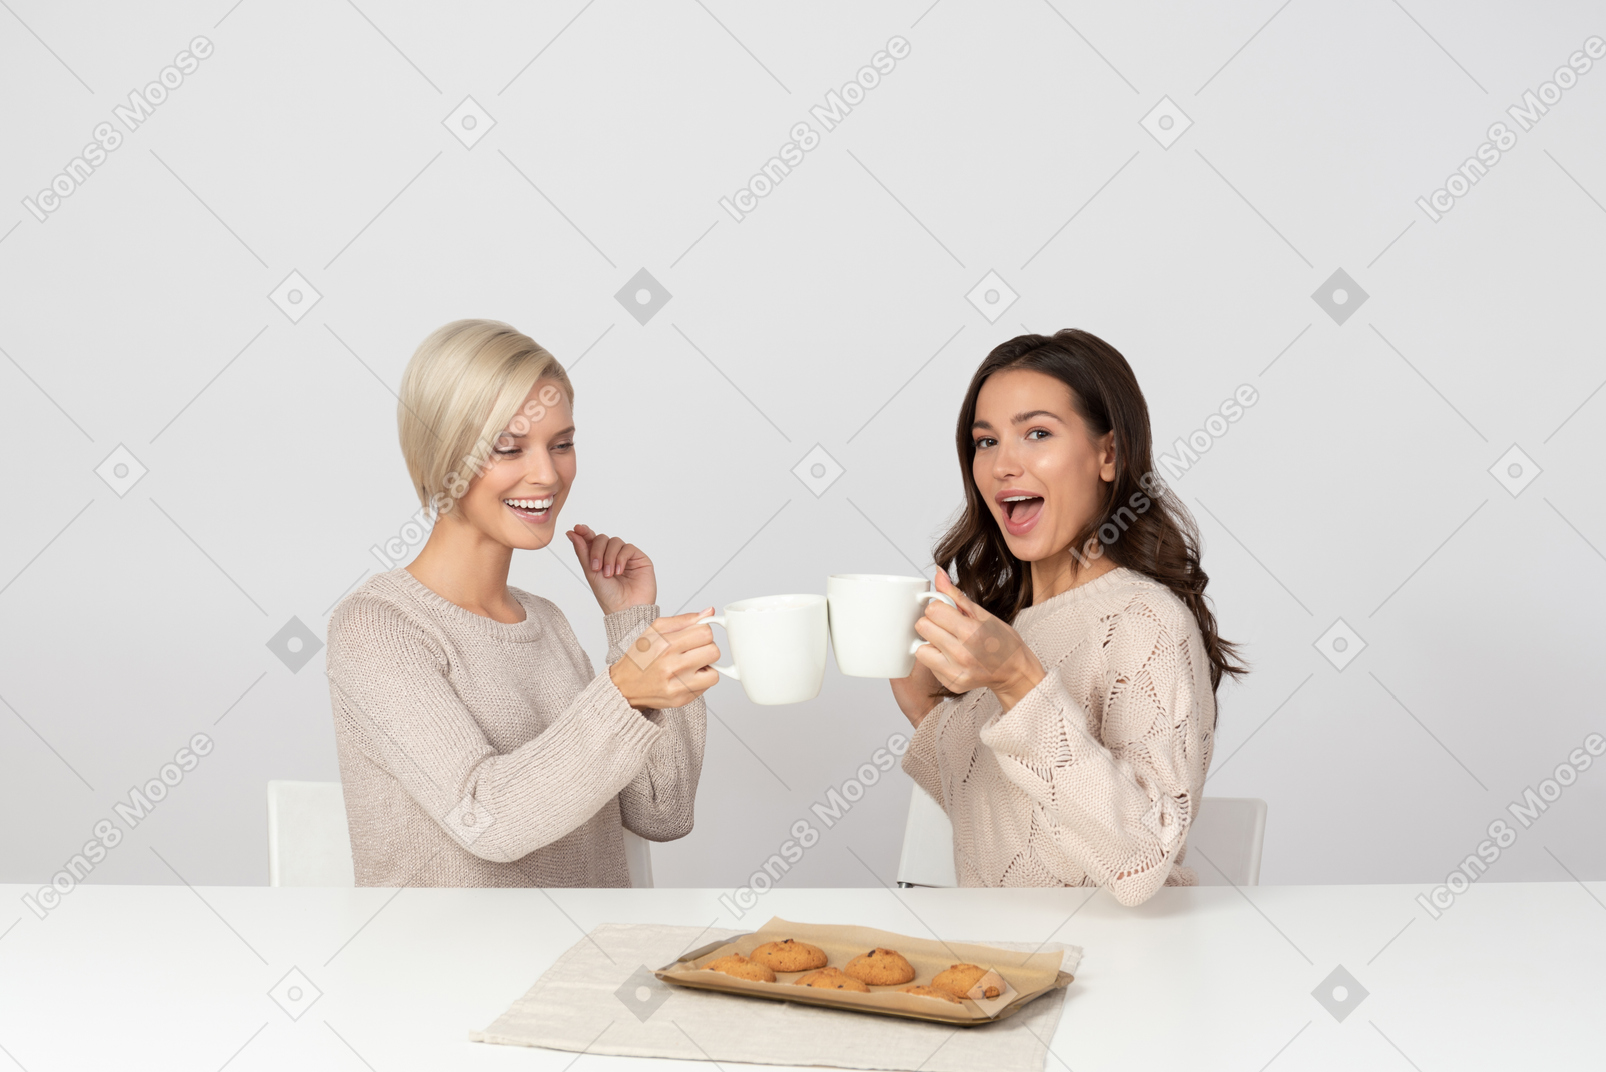 Young women drinking coffee with cookies and laughing